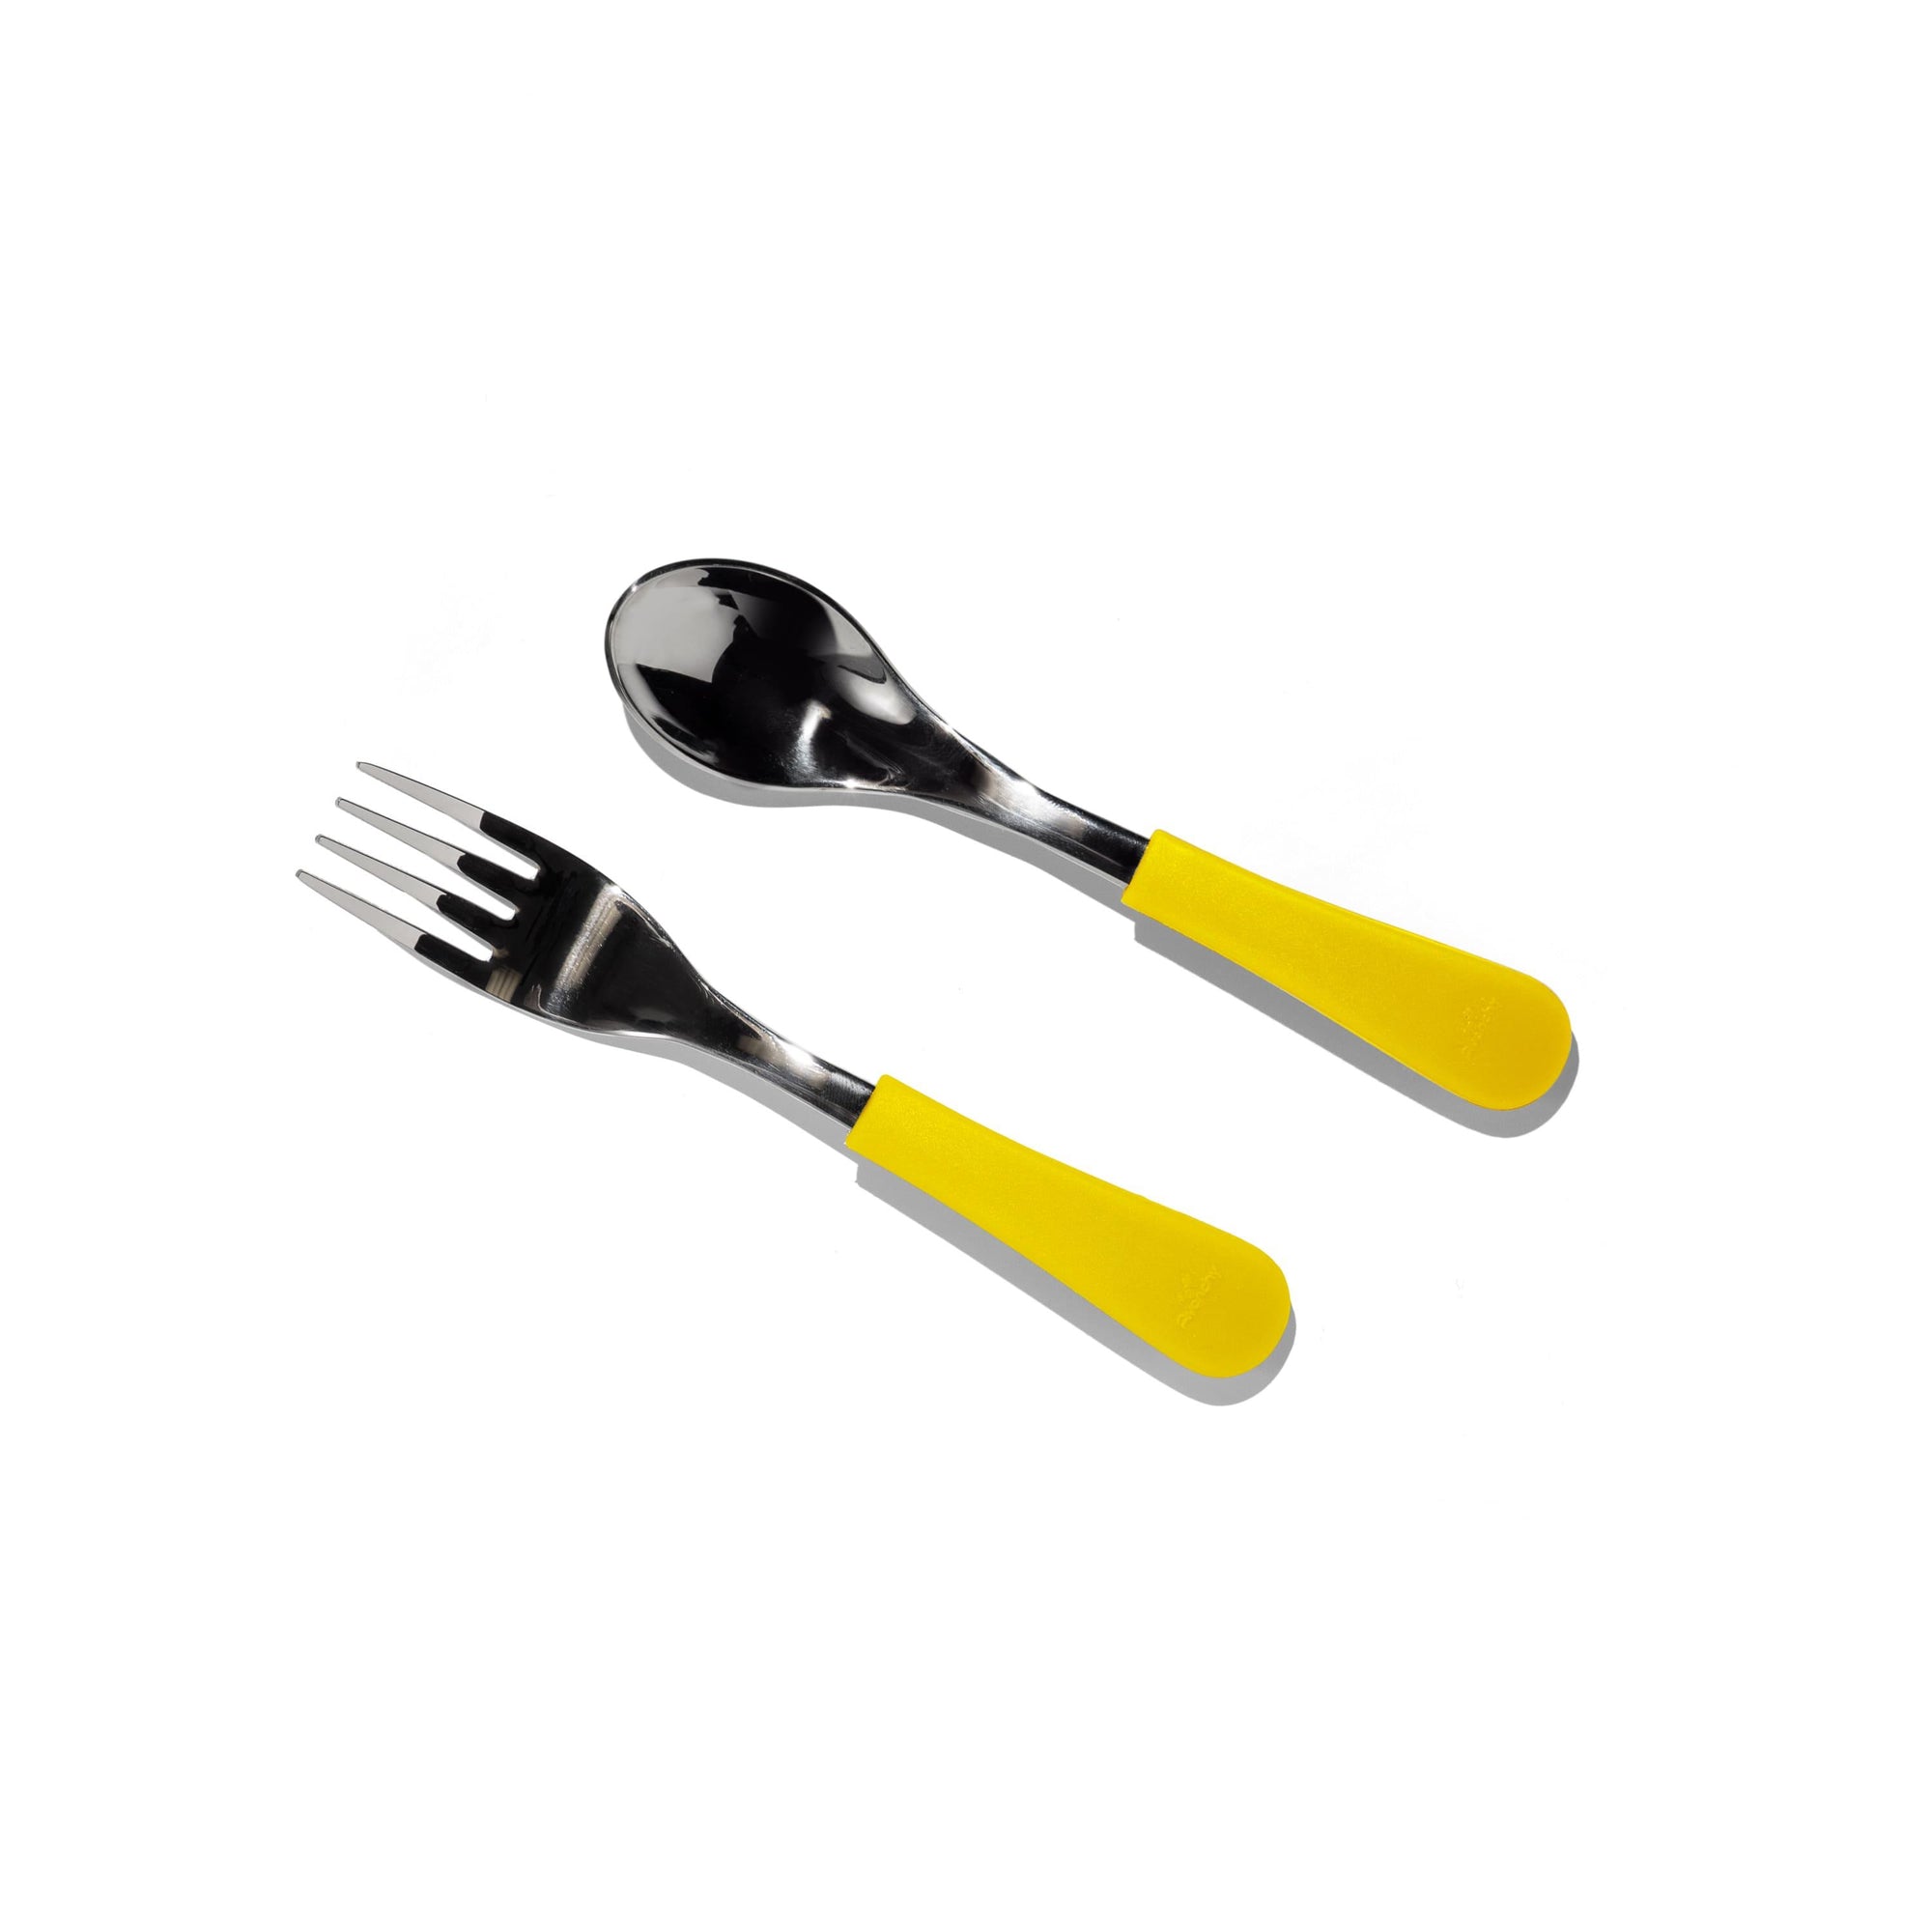 Stainless Steel Baby Forks, 2 Pack - Avanchy Sustainable Baby Dishware